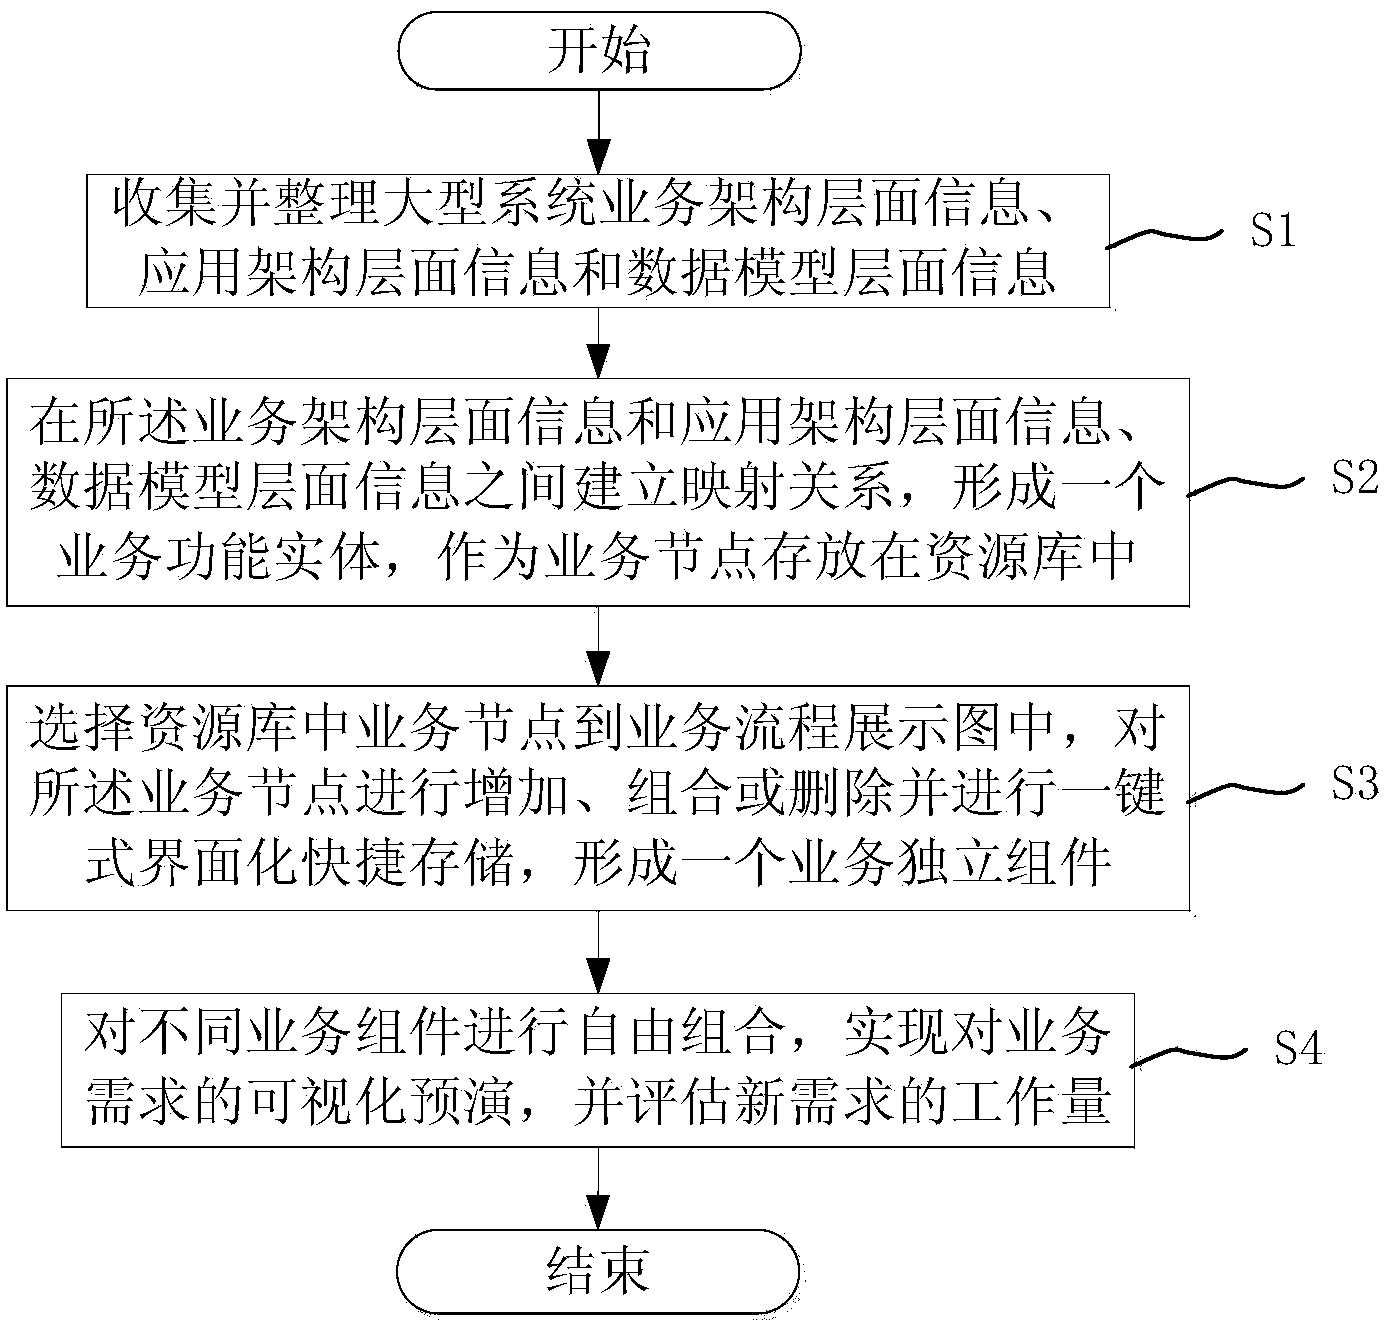 Composite control method of demand preview business